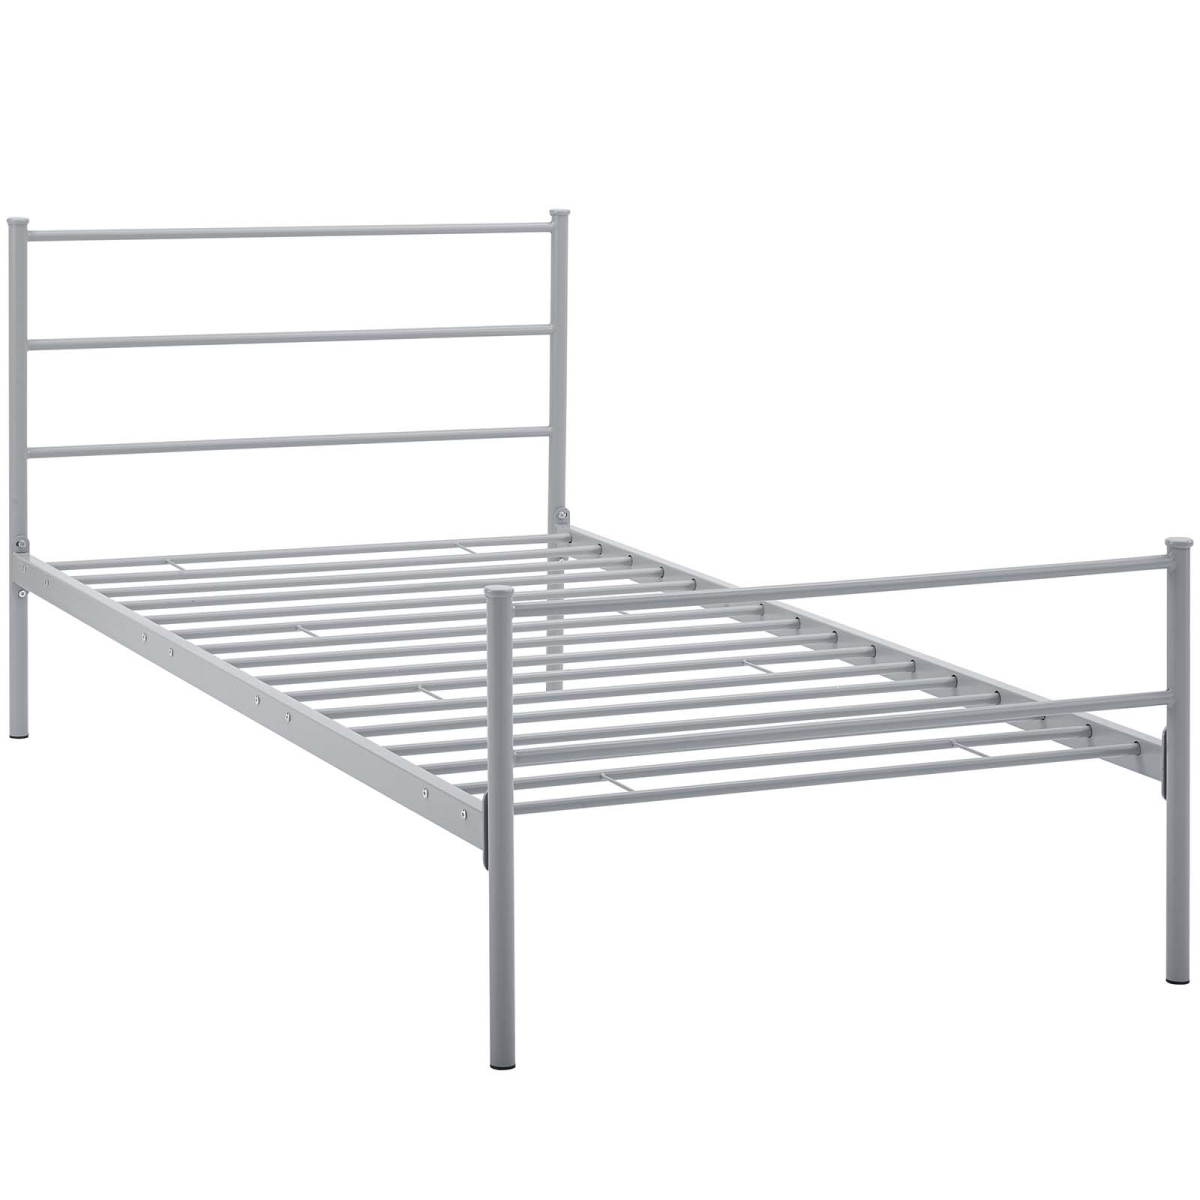 Mod-5551-gry-set 34.5 X 41.5 In. Alina Twin Platform Bed Frame - Gray